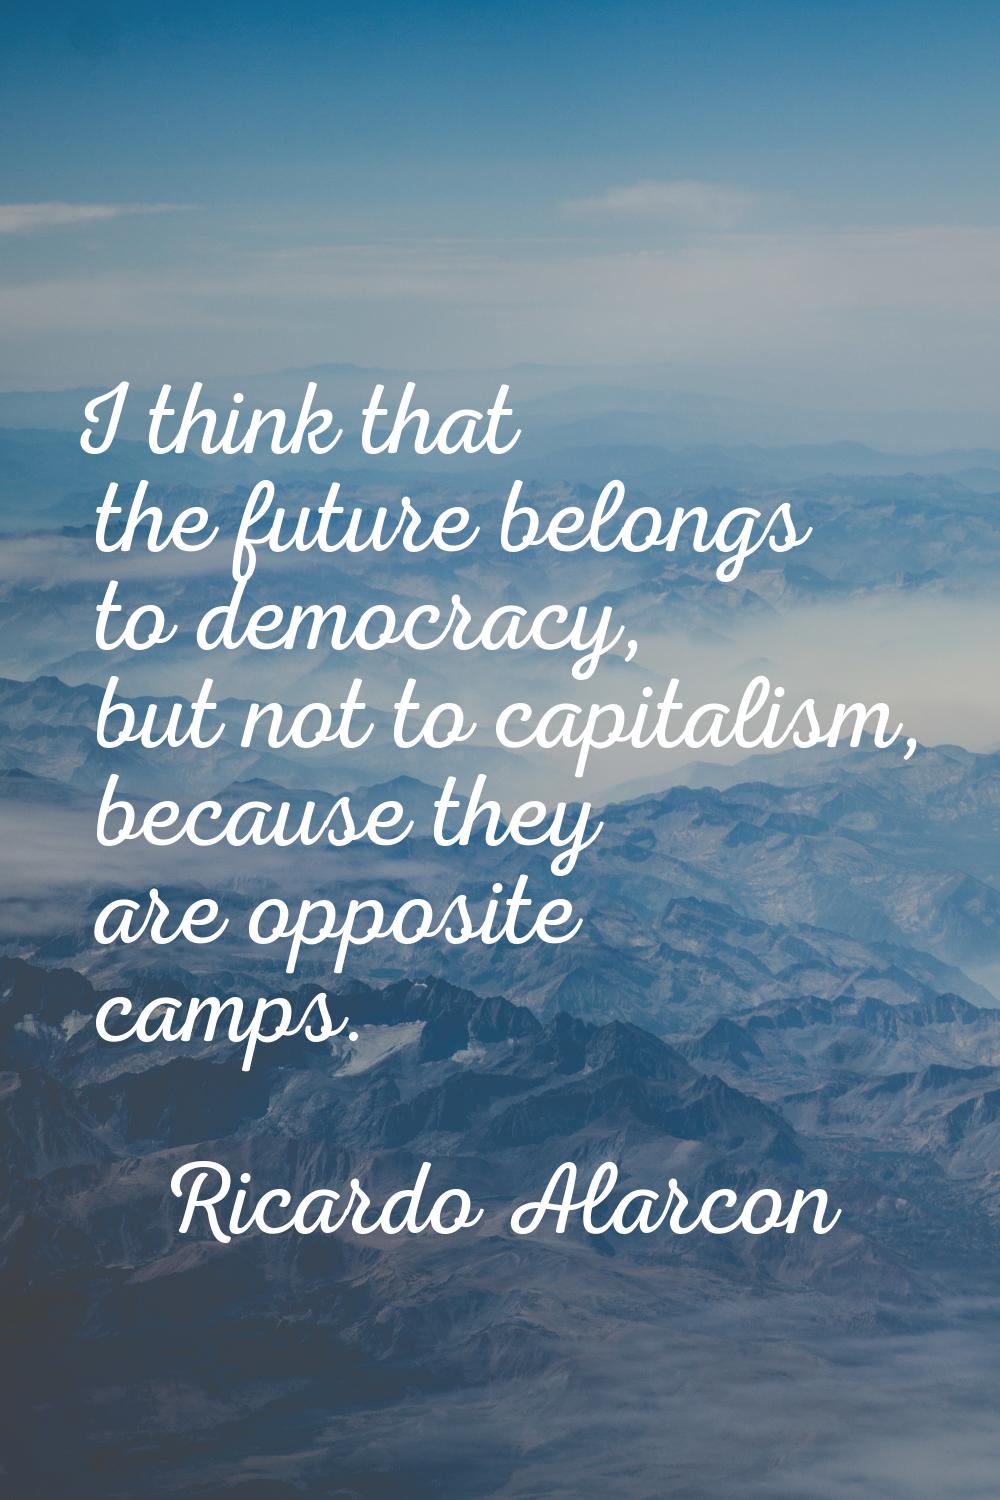 I think that the future belongs to democracy, but not to capitalism, because they are opposite camp